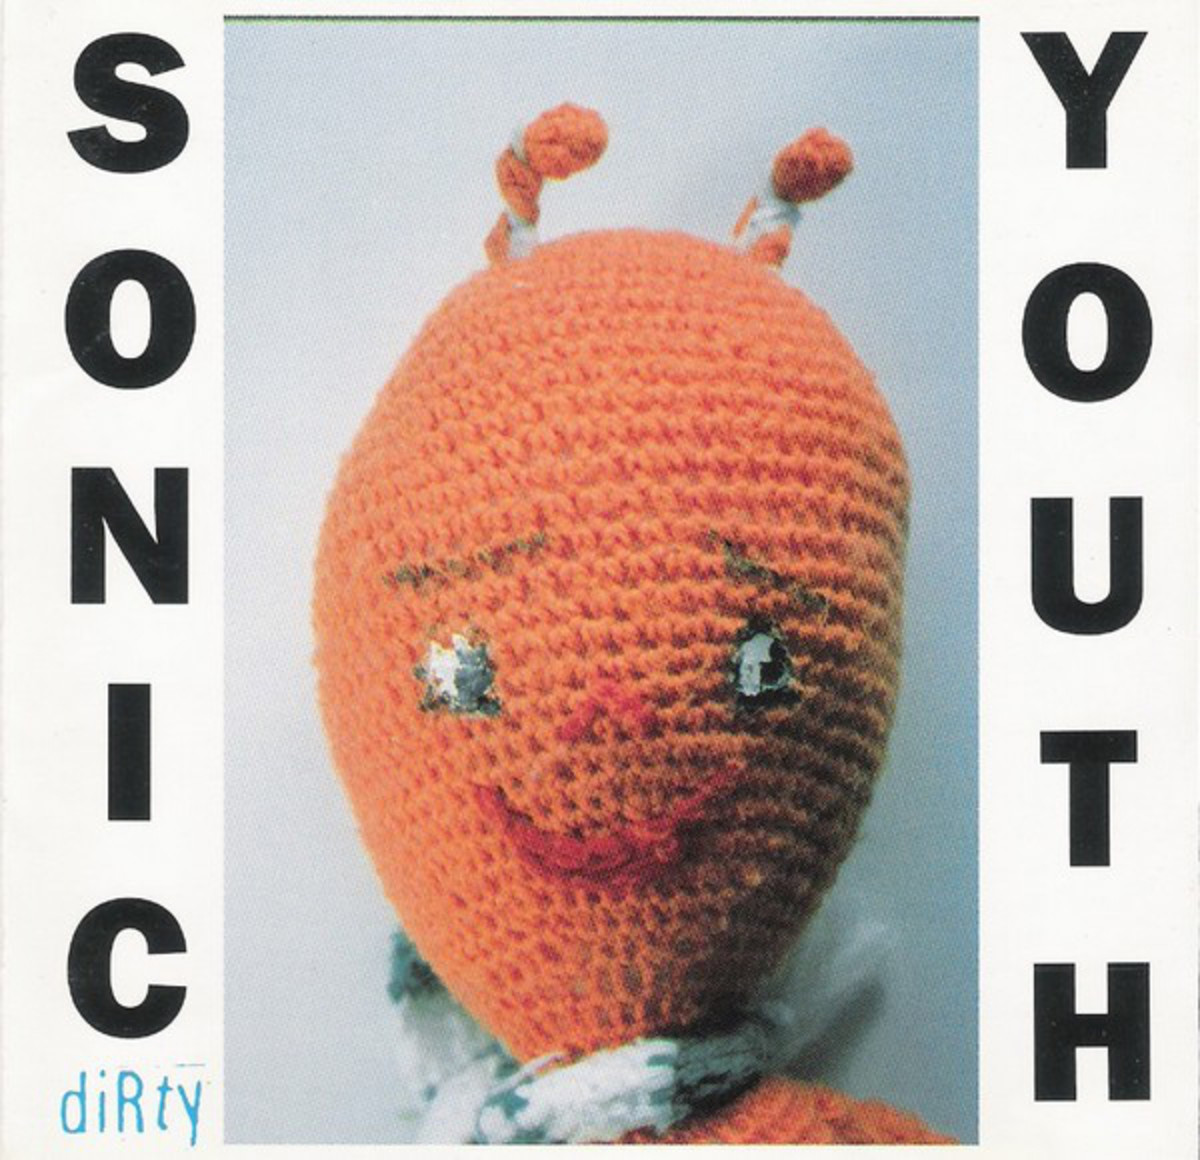 Sonic Youth, Dirty